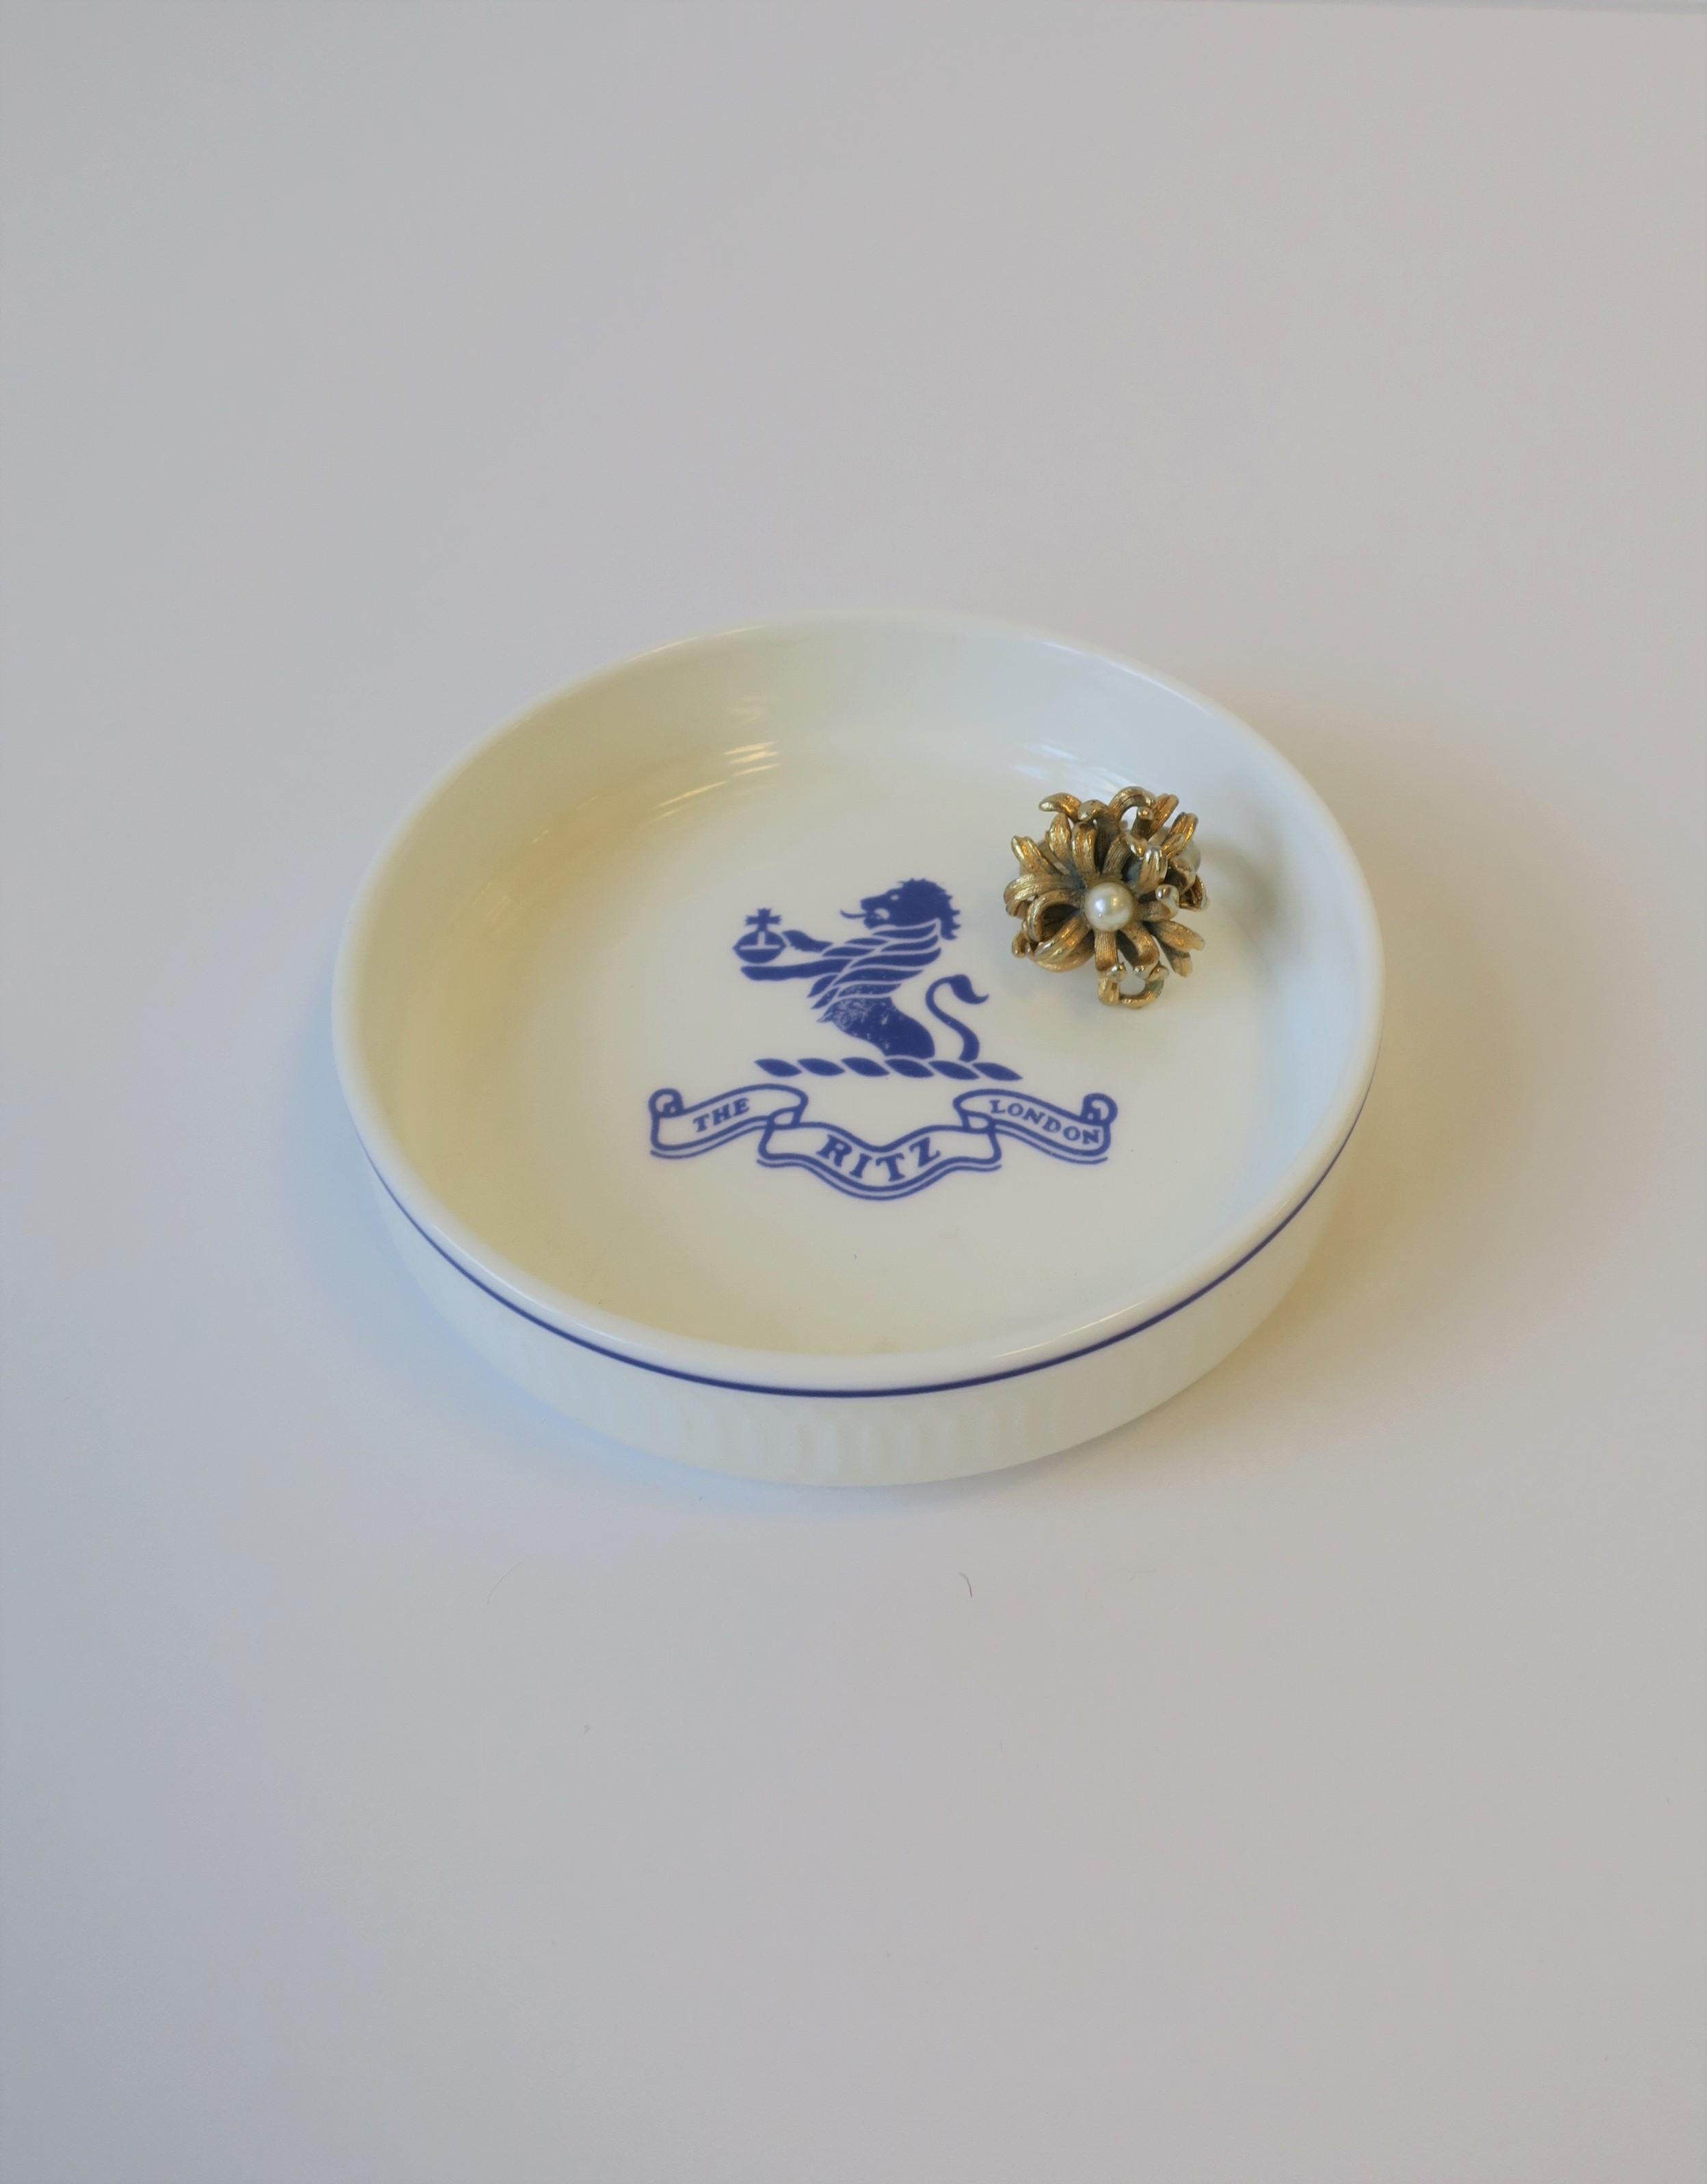 Regency The Ritz London Blue and White Porcelain Jewelry Dish